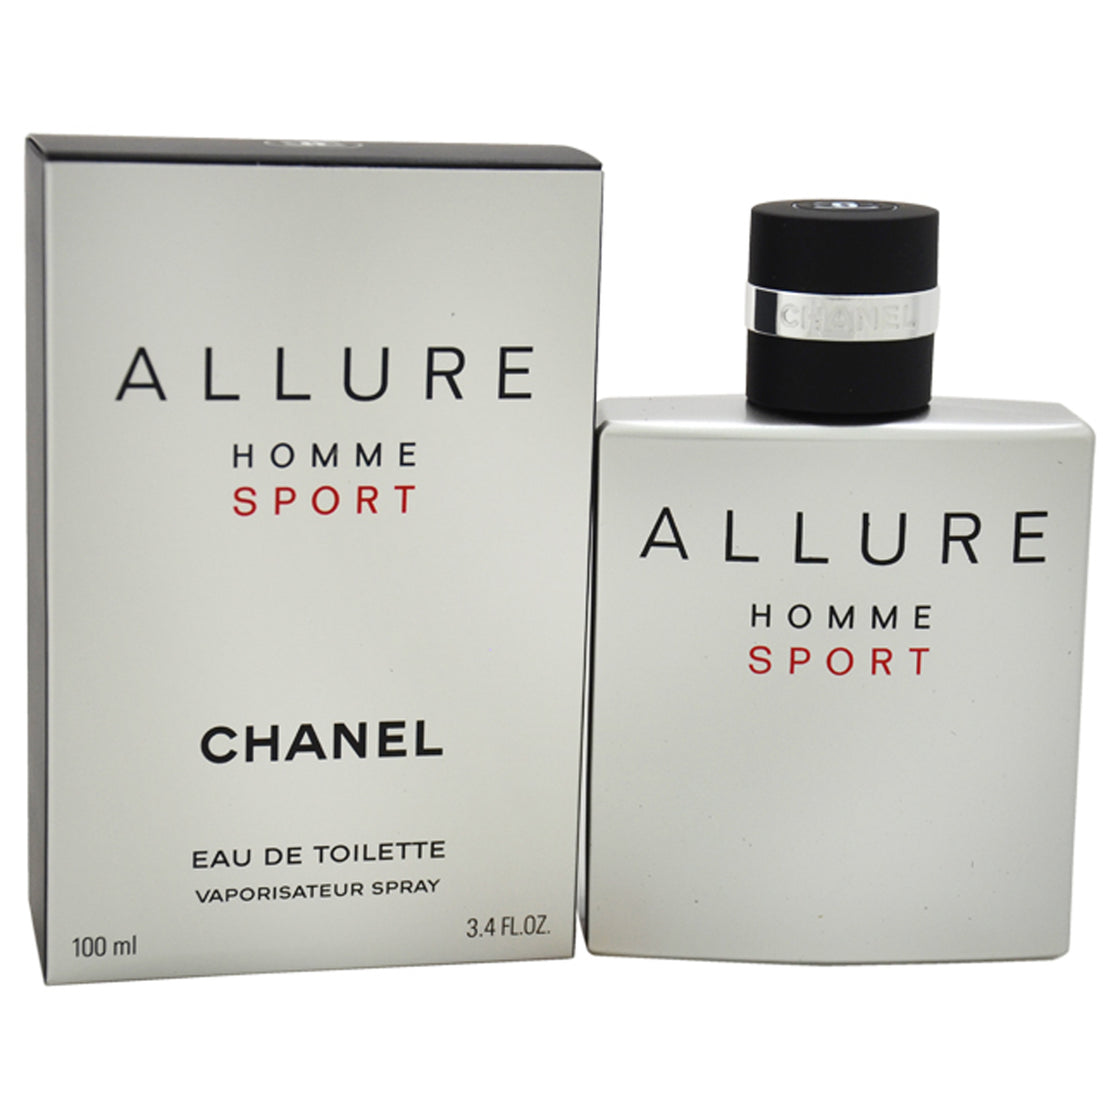 Allure Homme Sport by Chanel for Men - 3.4 oz EDT Spray